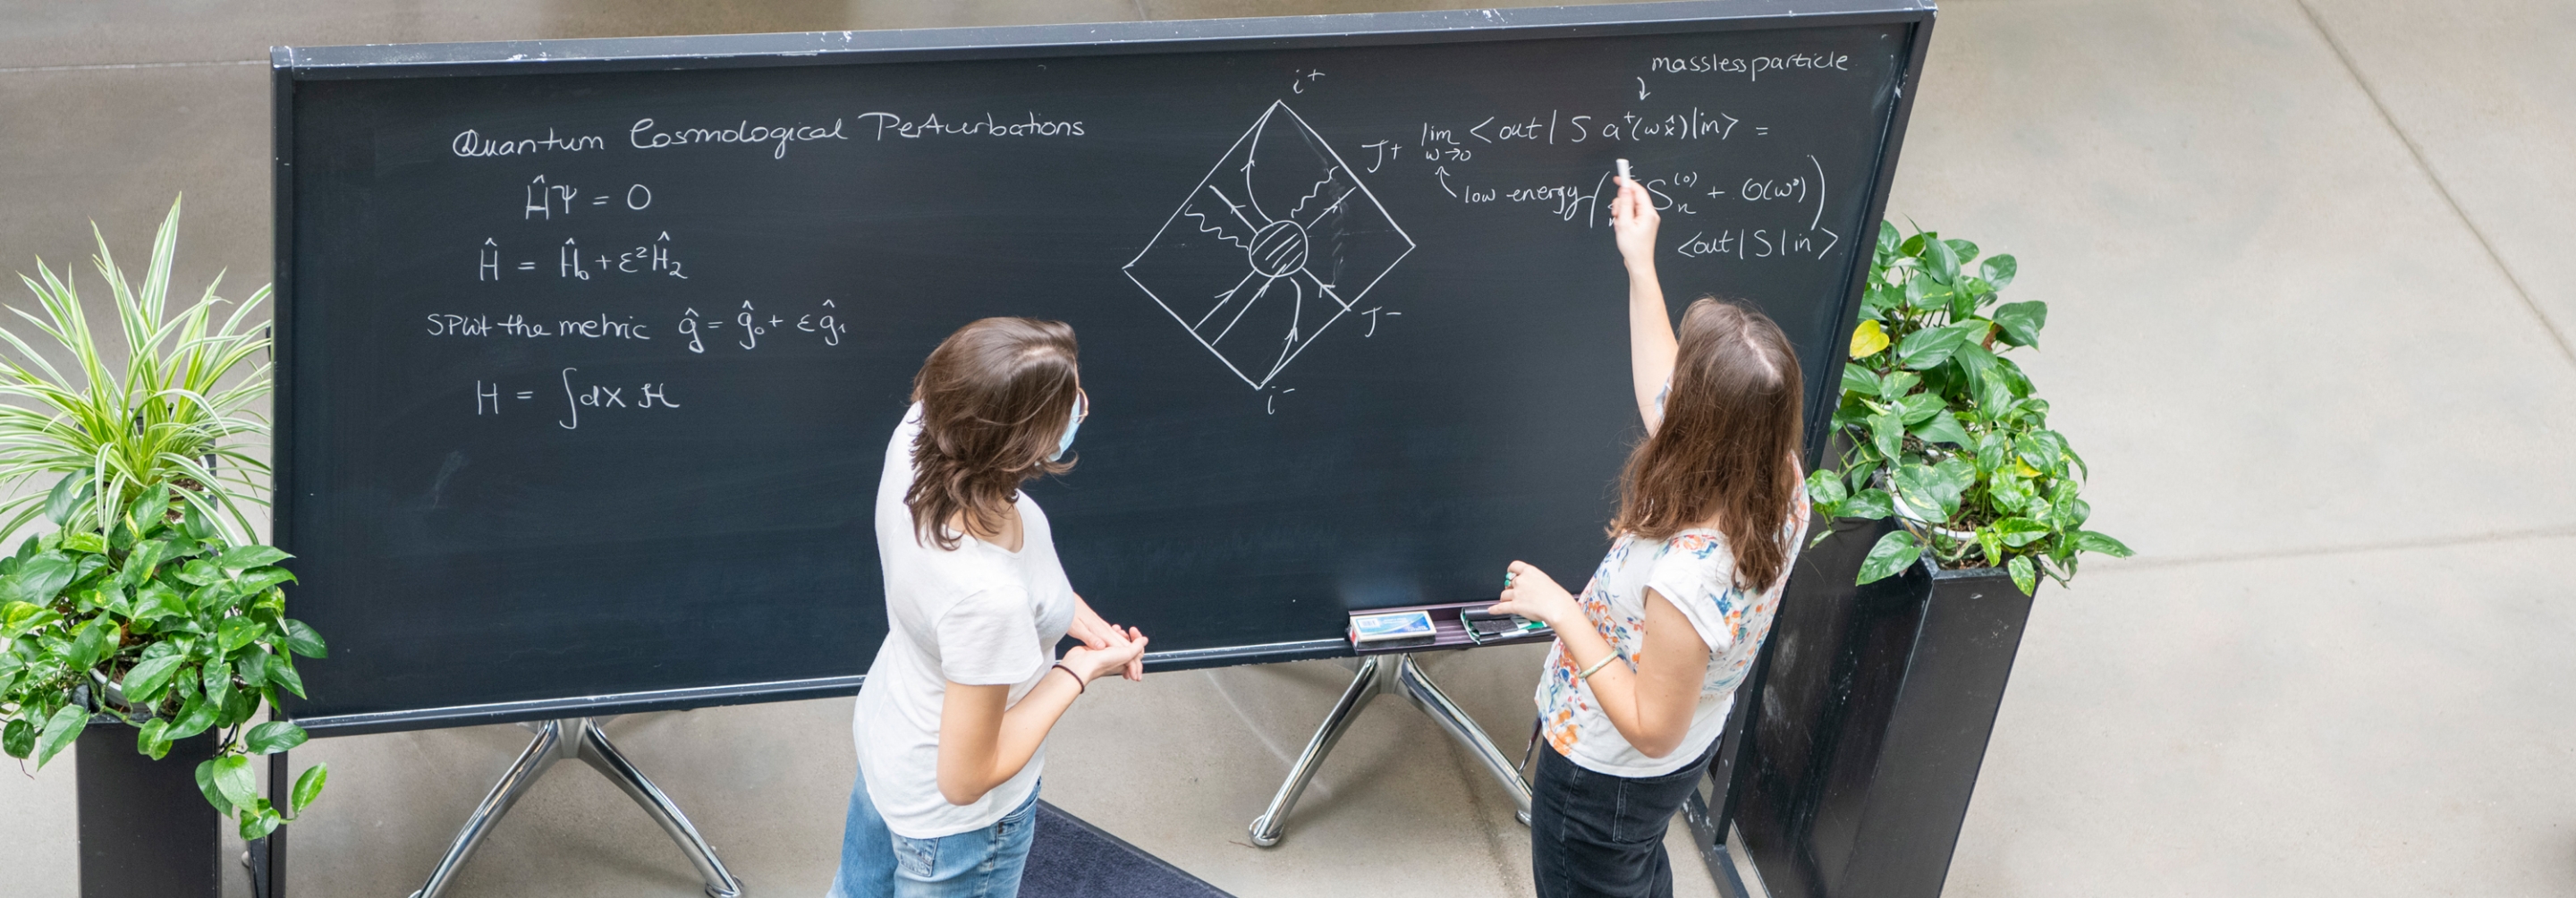 Aerial shot of two women working on equations together at a blackboard